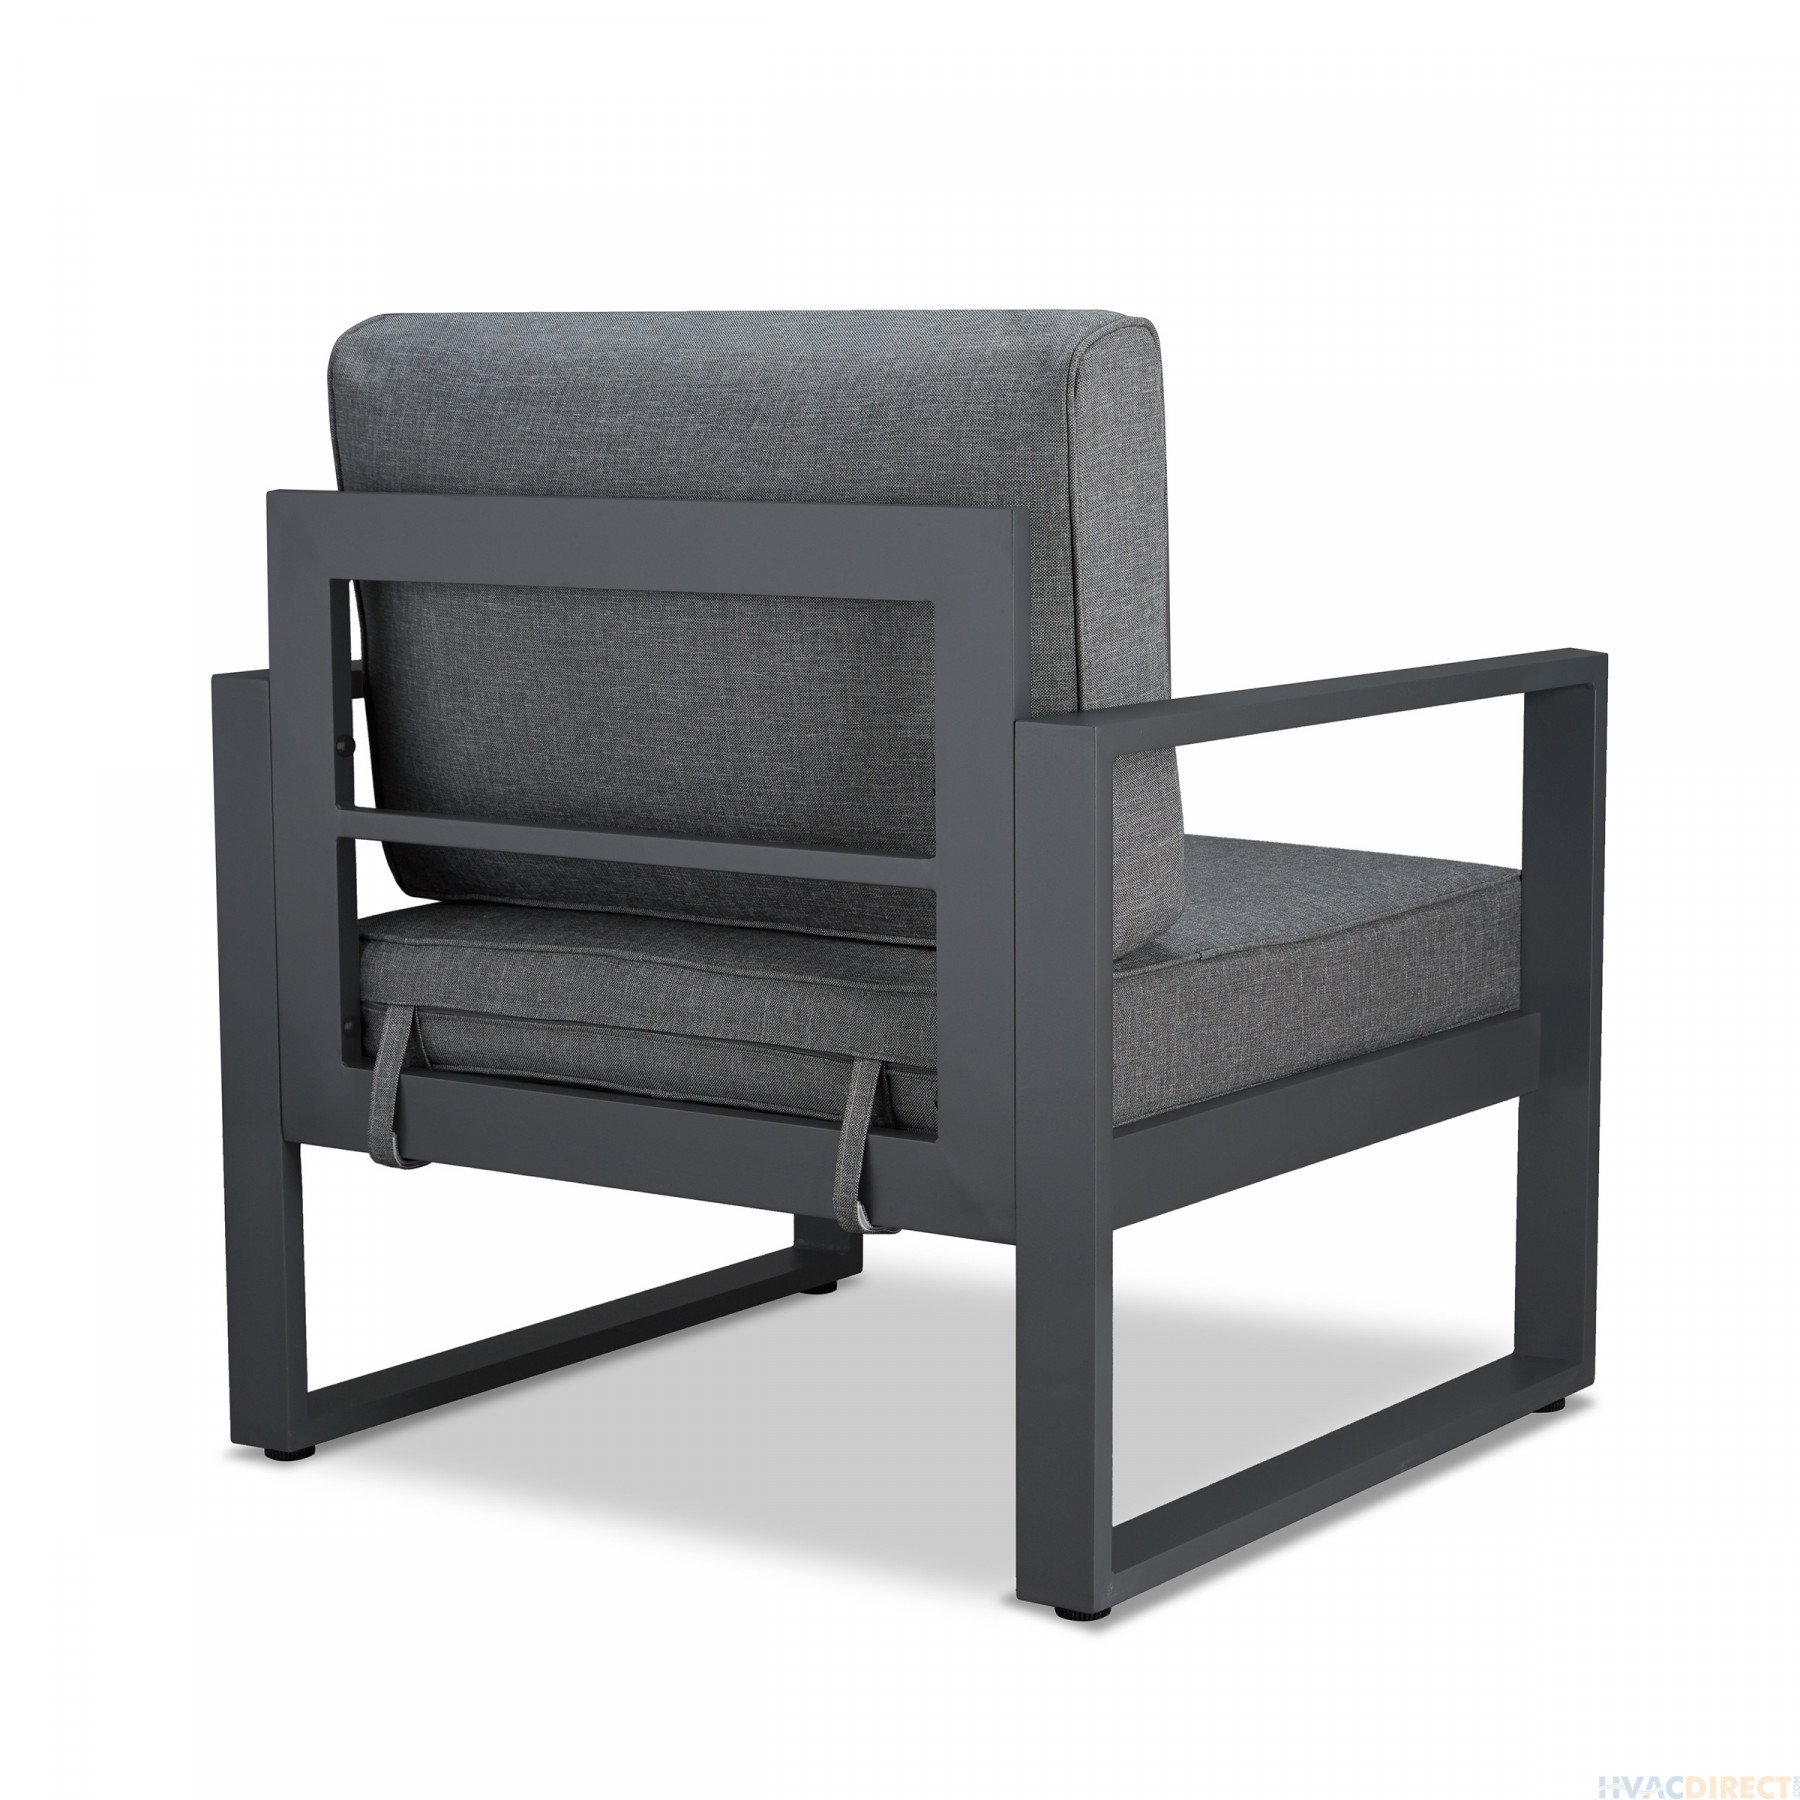 Real Flame Baltic Chair Set (2 Chairs) Gray - 9611-GRY